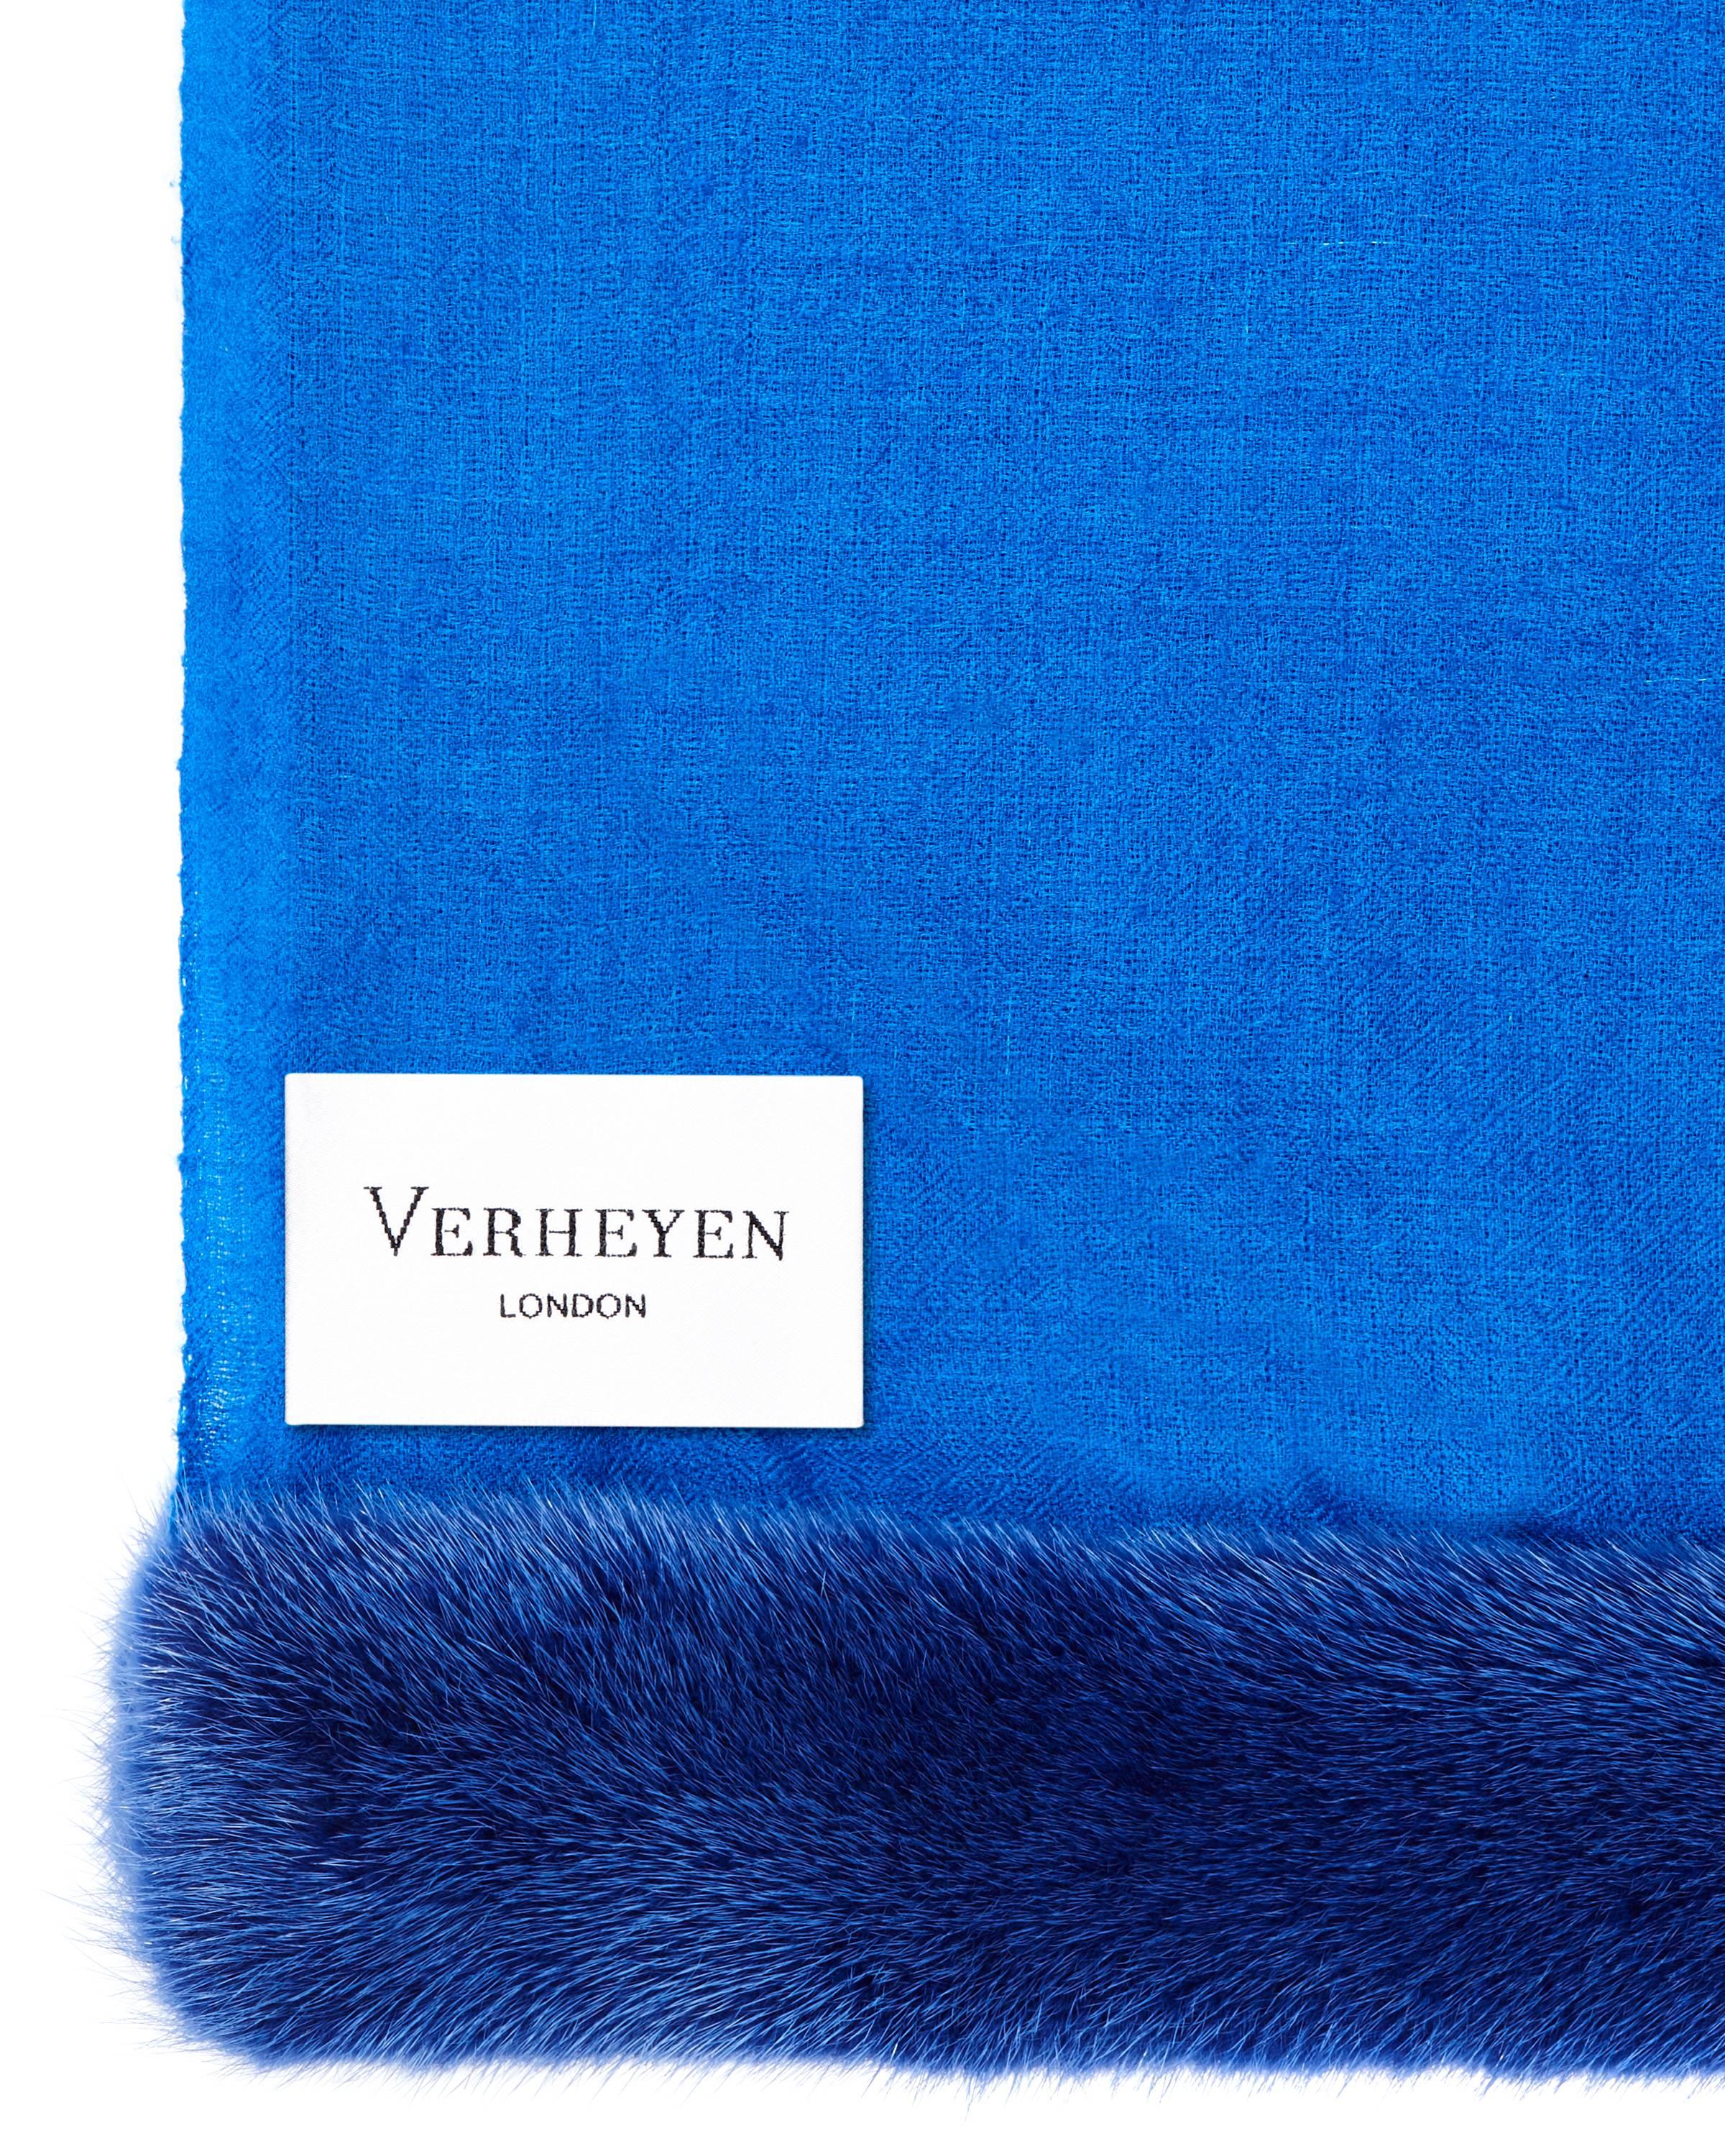 Verheyen London Handwoven Mink Fur Trimmed Cashmere Shawl in Blue

Verheyen London’s shawl is spun from the finest lightweight handwoven cashmere from Kashmir and finished with the most exquisite dyed mink. Its warmth envelopes you with luxury,